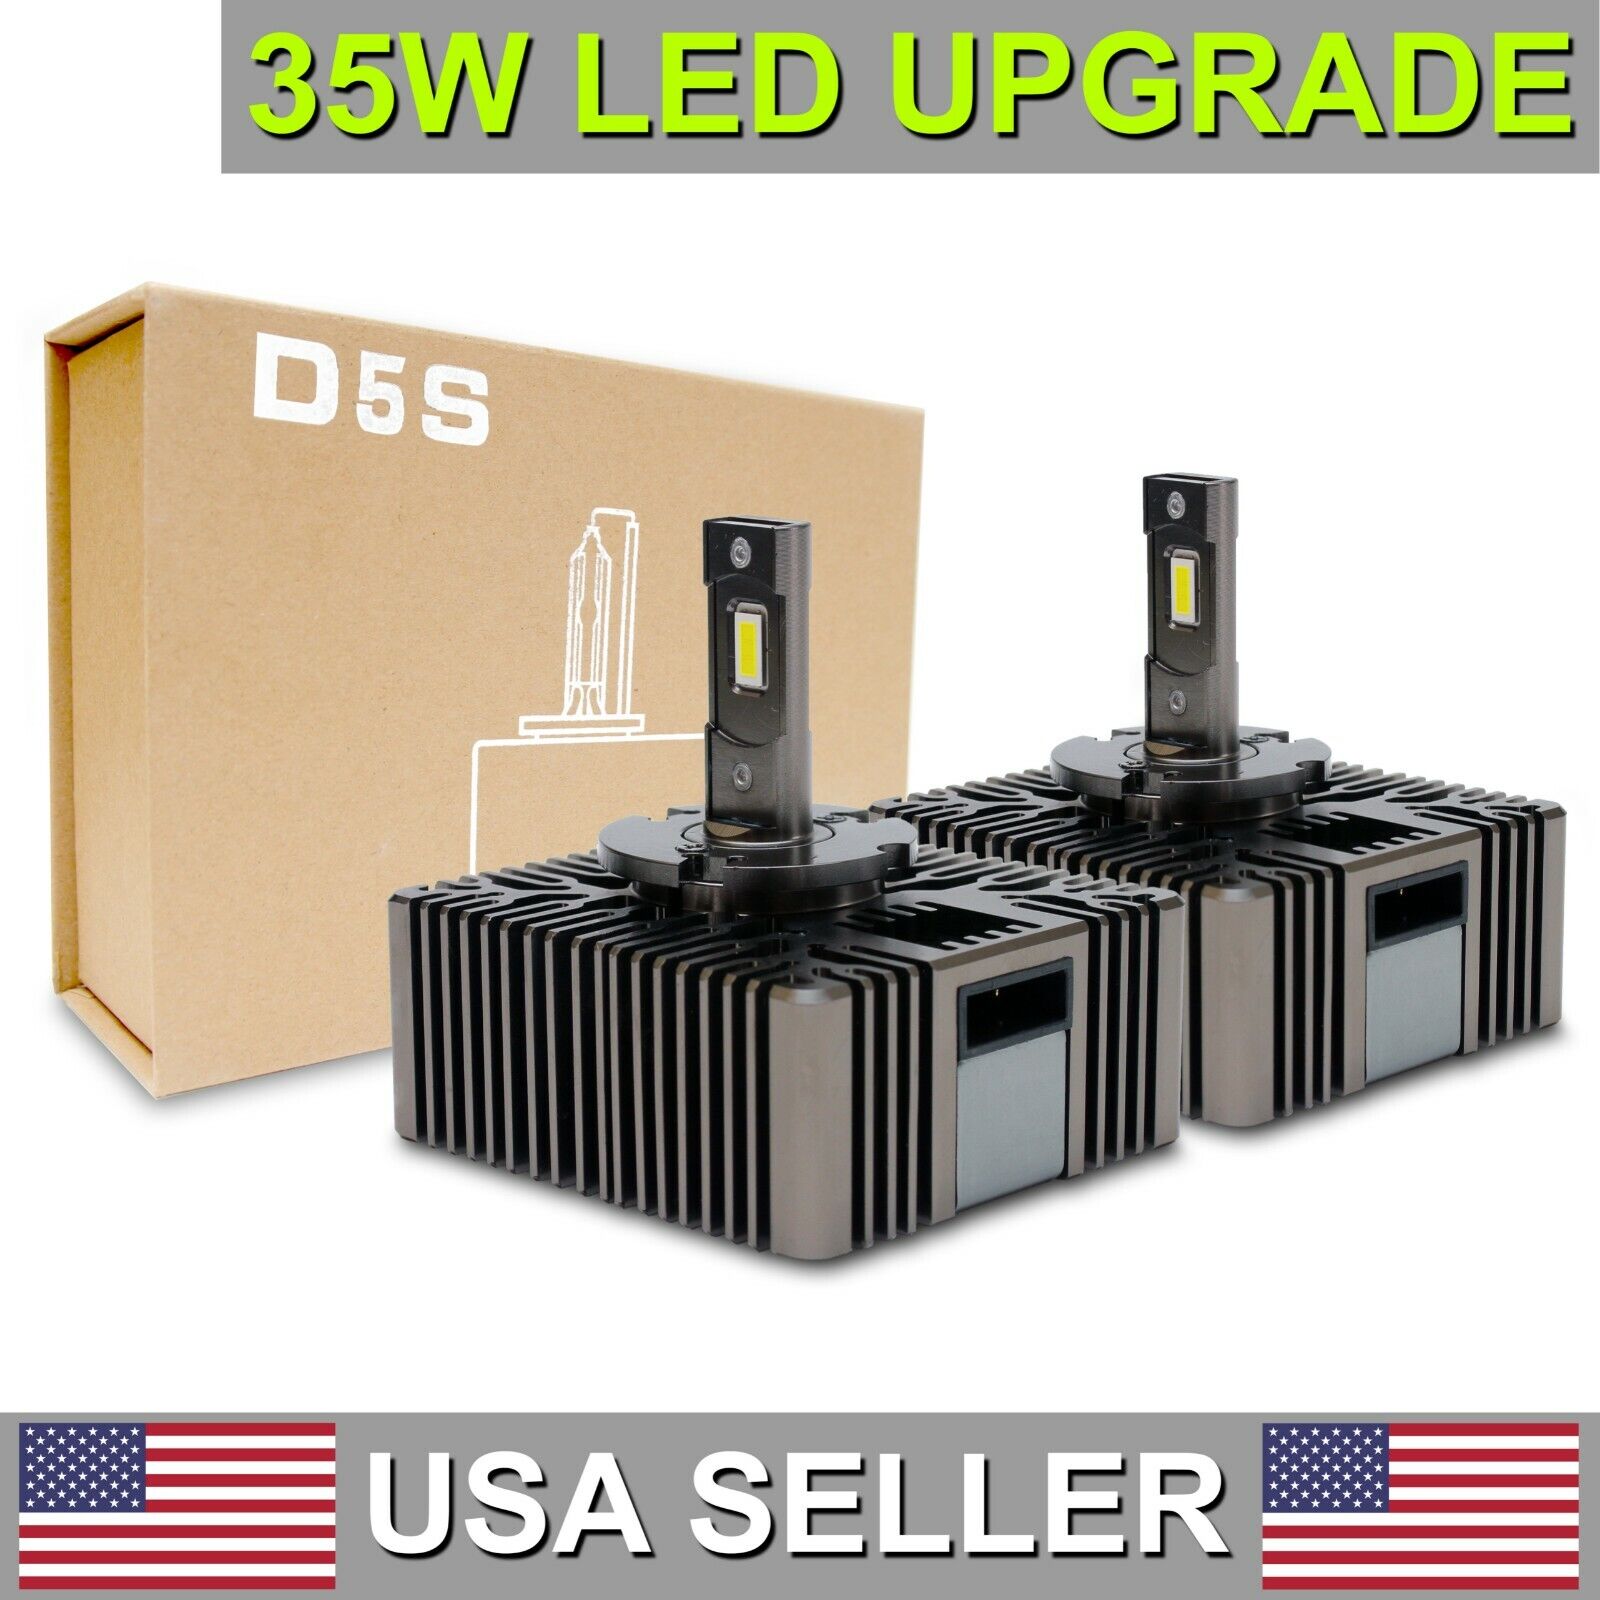 2x D5S LED 6000K White Bulbs 35W 3000lm Upgrade 40% More Powerful Replacement 